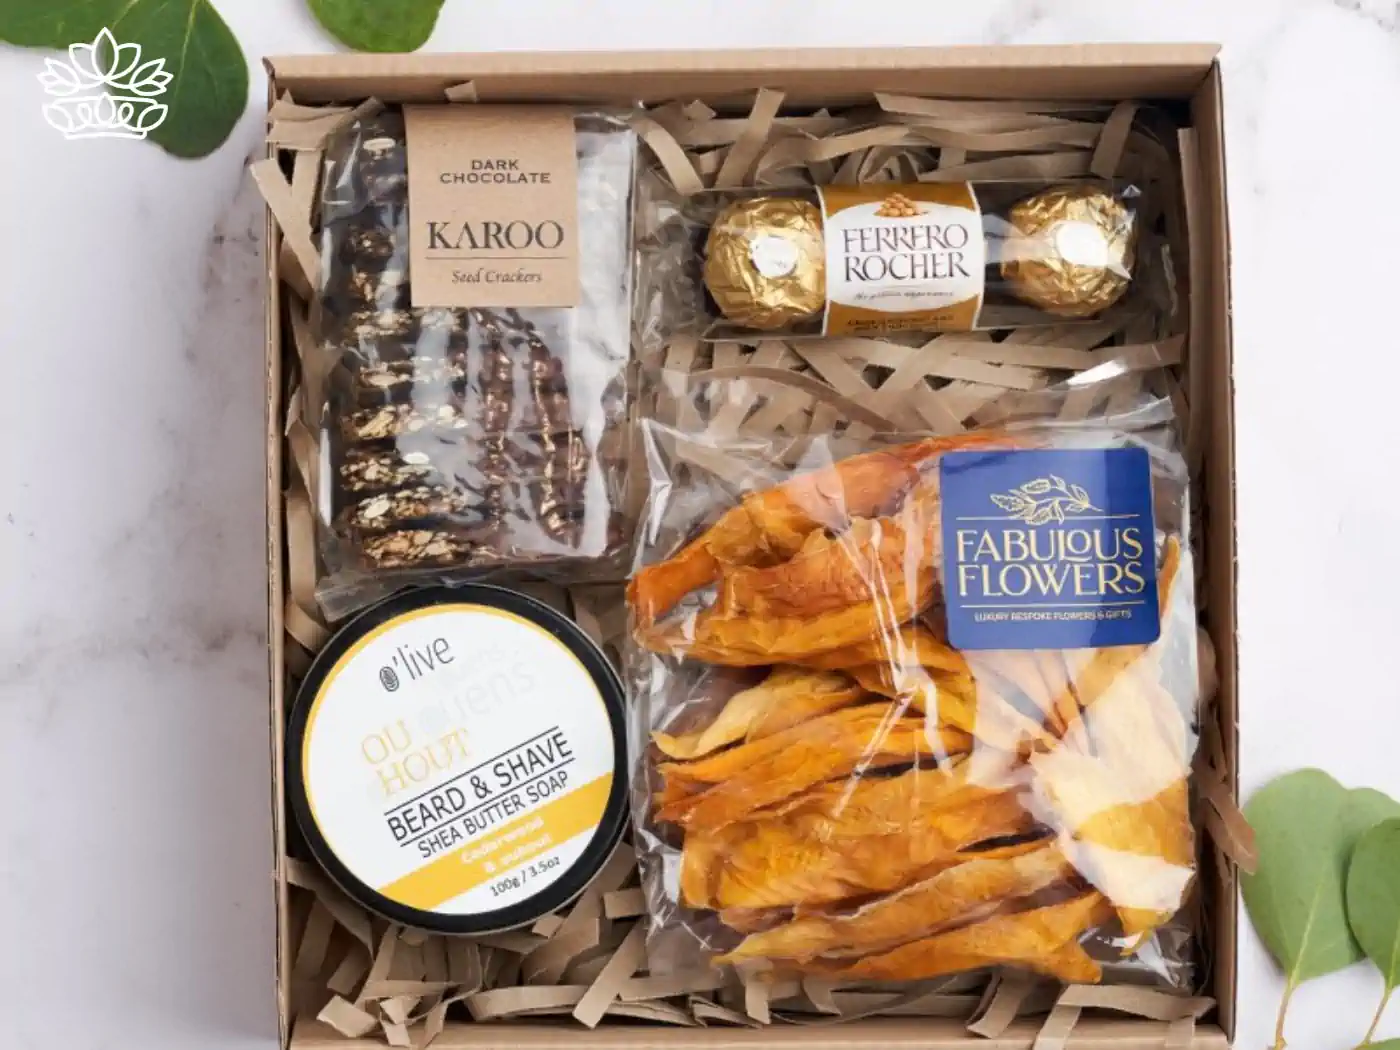 A curated housewarming gift box filled with luxurious items, including dark chocolate seed crackers, two Ferrero Rocher chocolates, a container of beard and shave butter soap, and dried mango slices, all arranged in a rustic box with straw padding. Thoughtfully selected for a warm welcome home. Fabulous Flowers and Gifts.